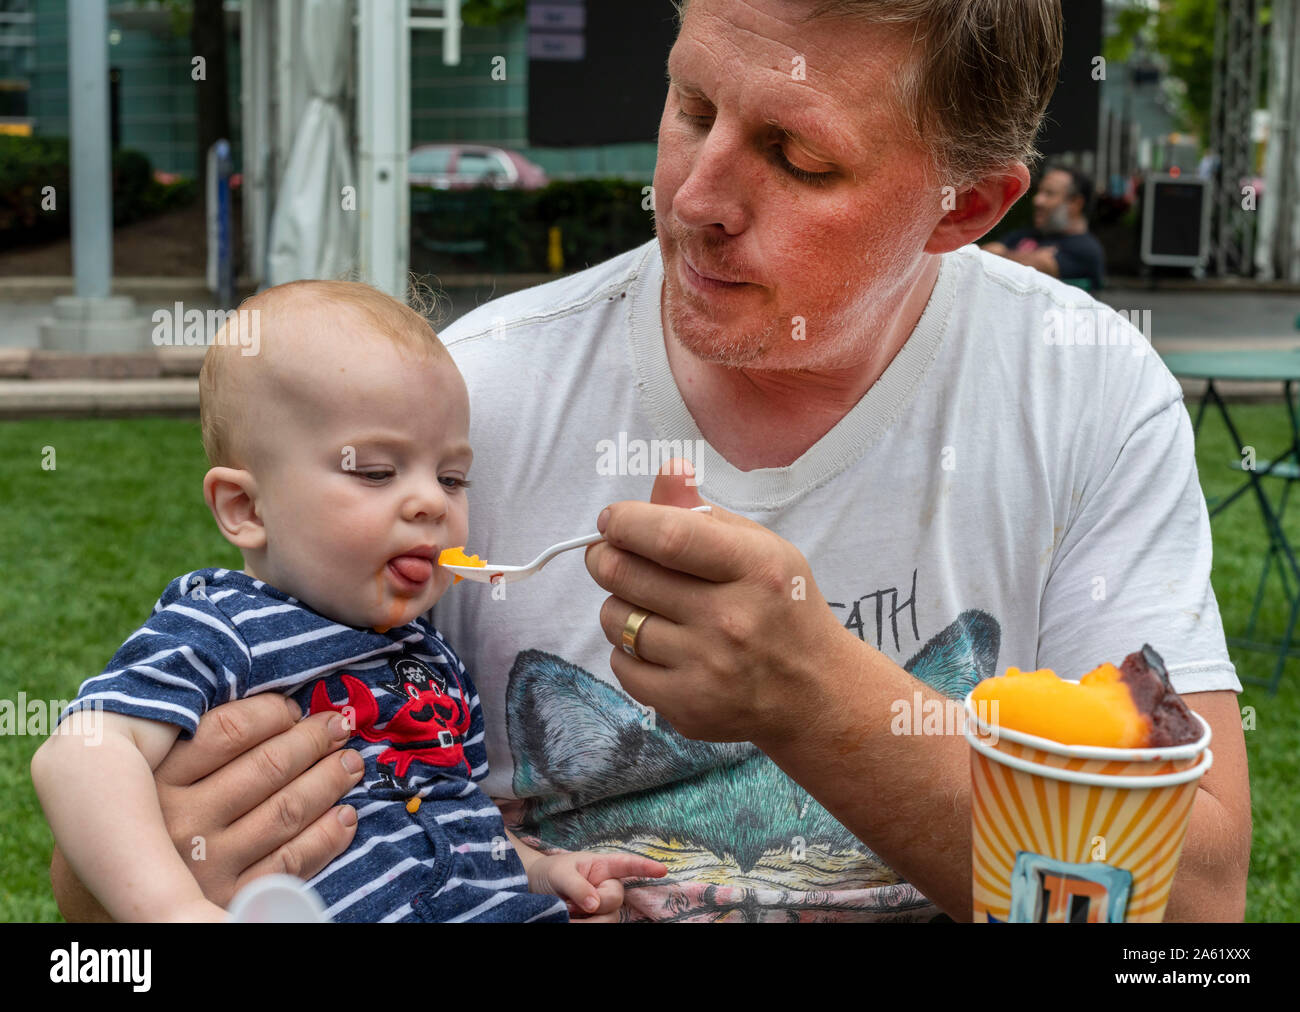 Detroit, Michigan - One-year-old Hendrix Hjermstad gets a treat from his dad, Adam Hjermstad Sr. Stock Photo